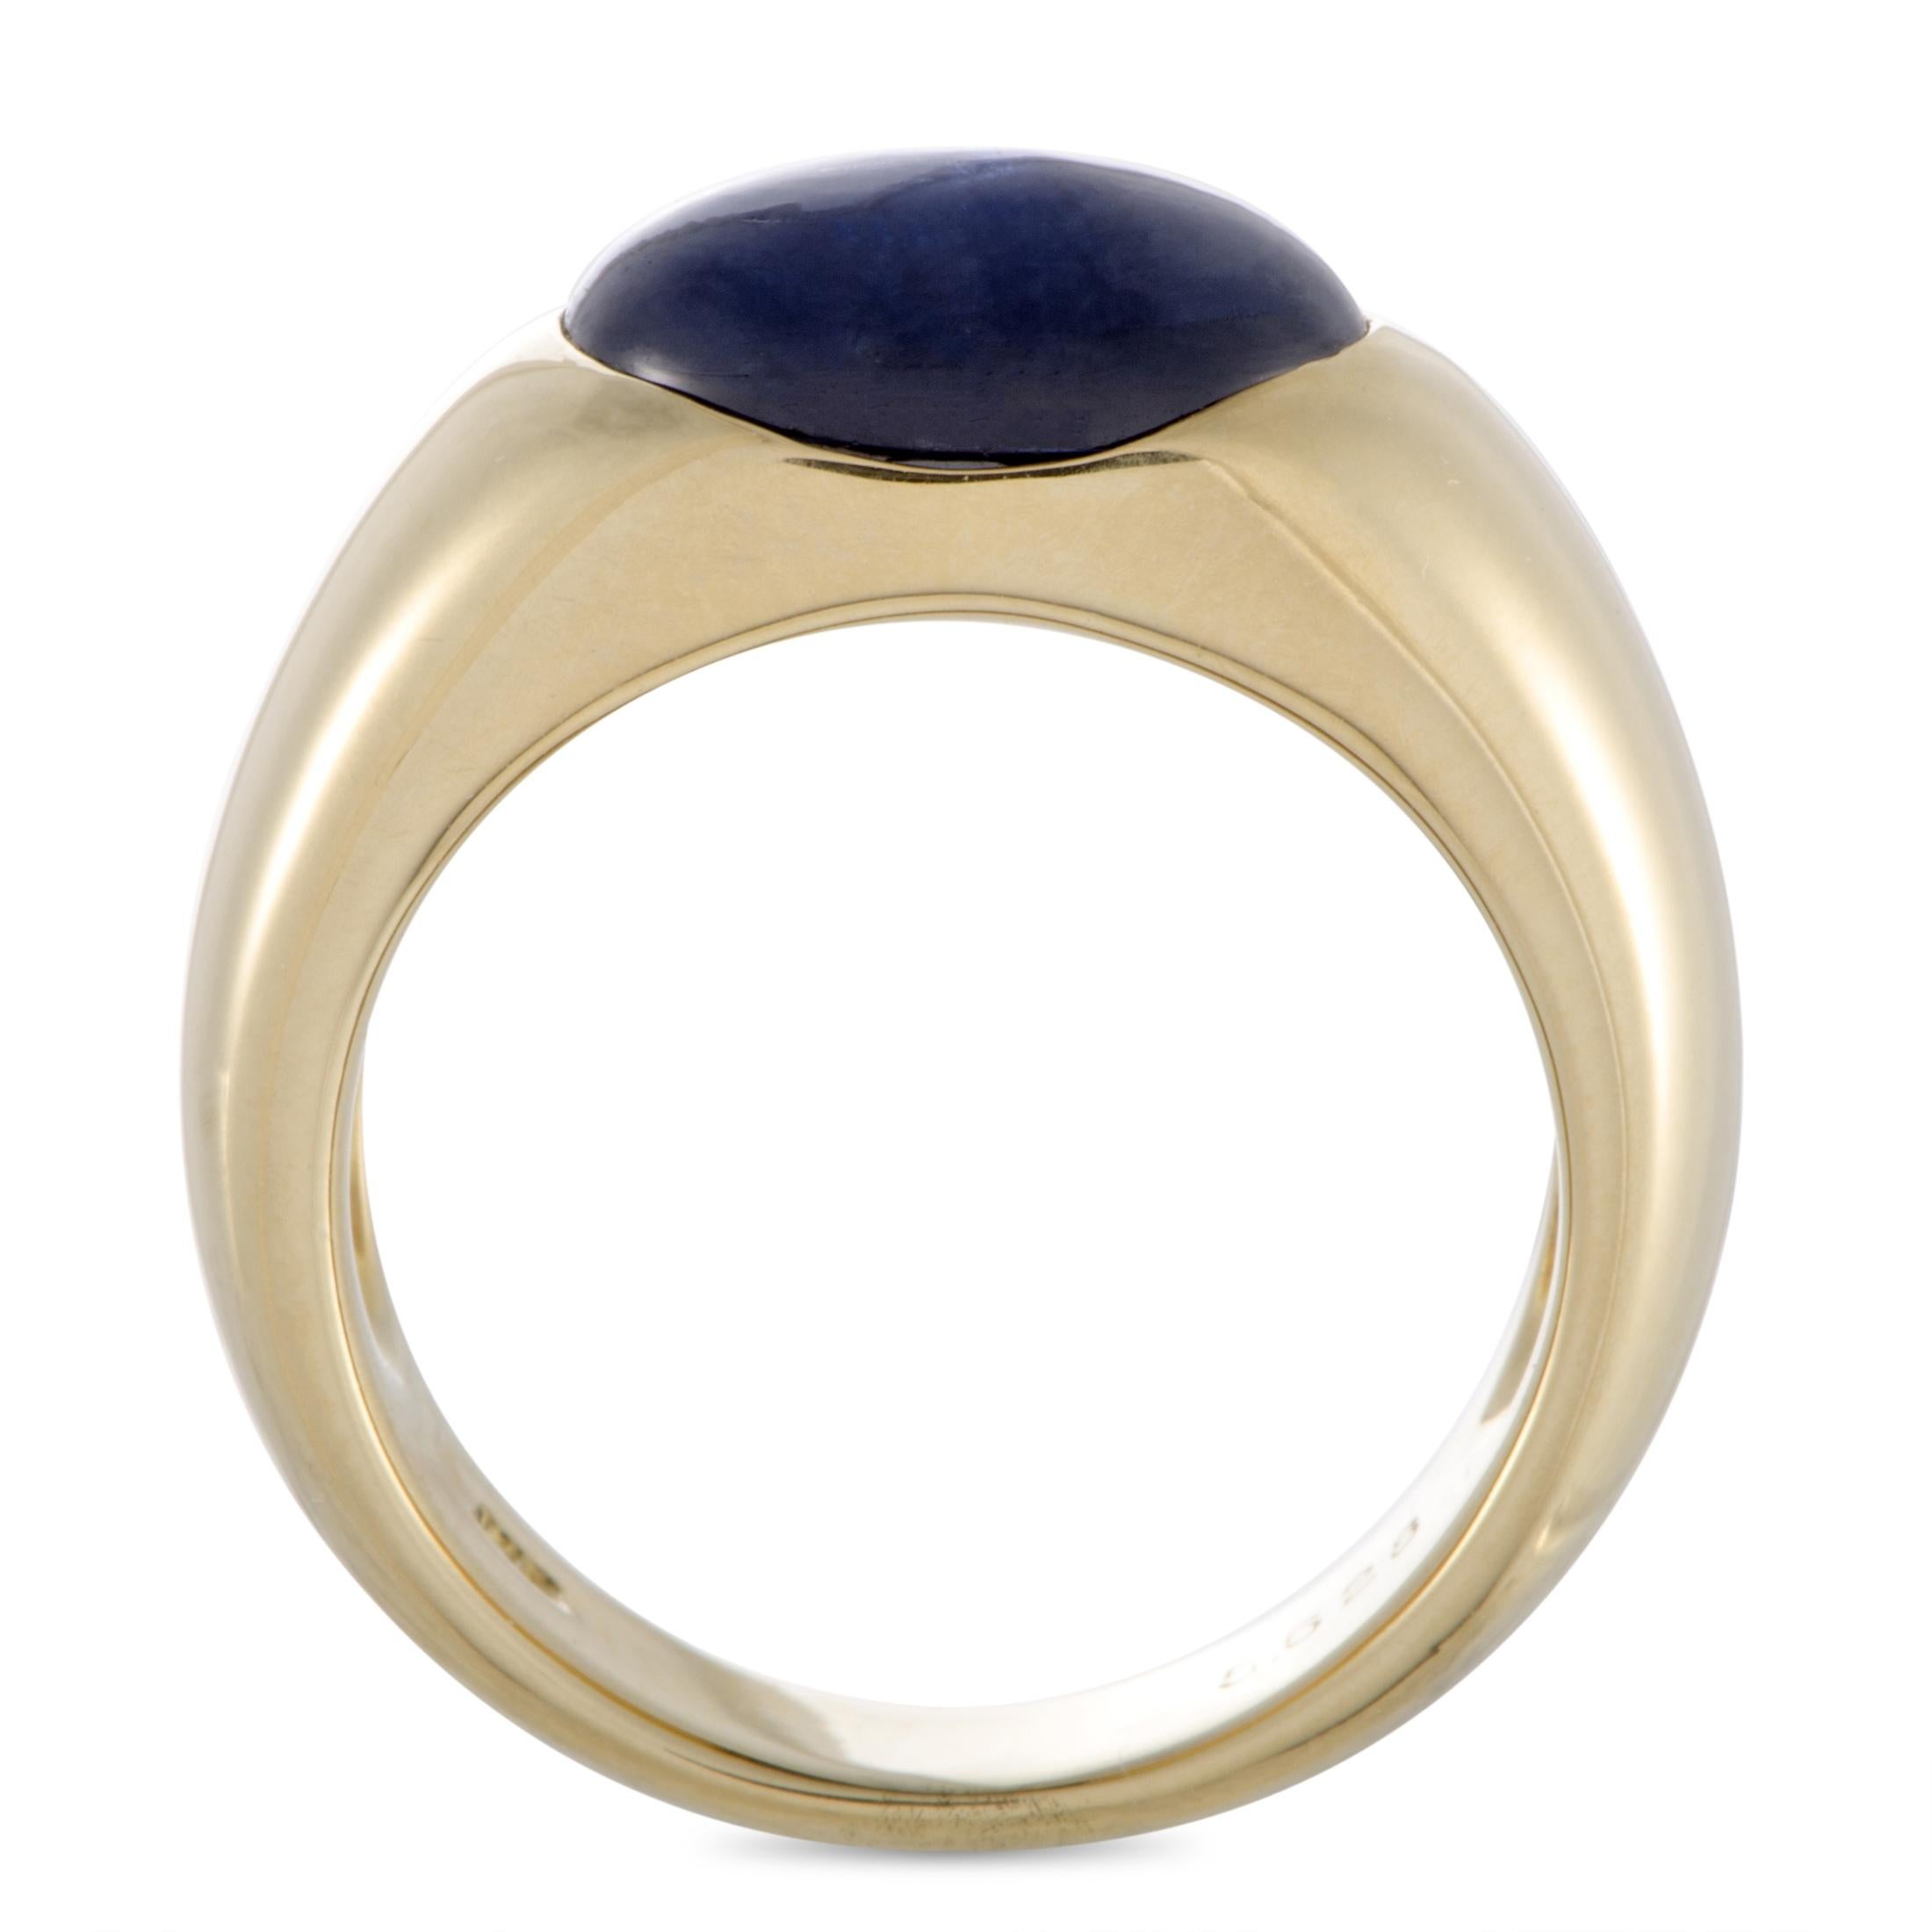 Splendidly made by Pomellato from classy 18K yellow gold, this remarkable ring is a Spectacular piece of accessory to add to your collection. The incredibly enchanting appearance of this sensational ring features an exquisite iolite.
Ring Top